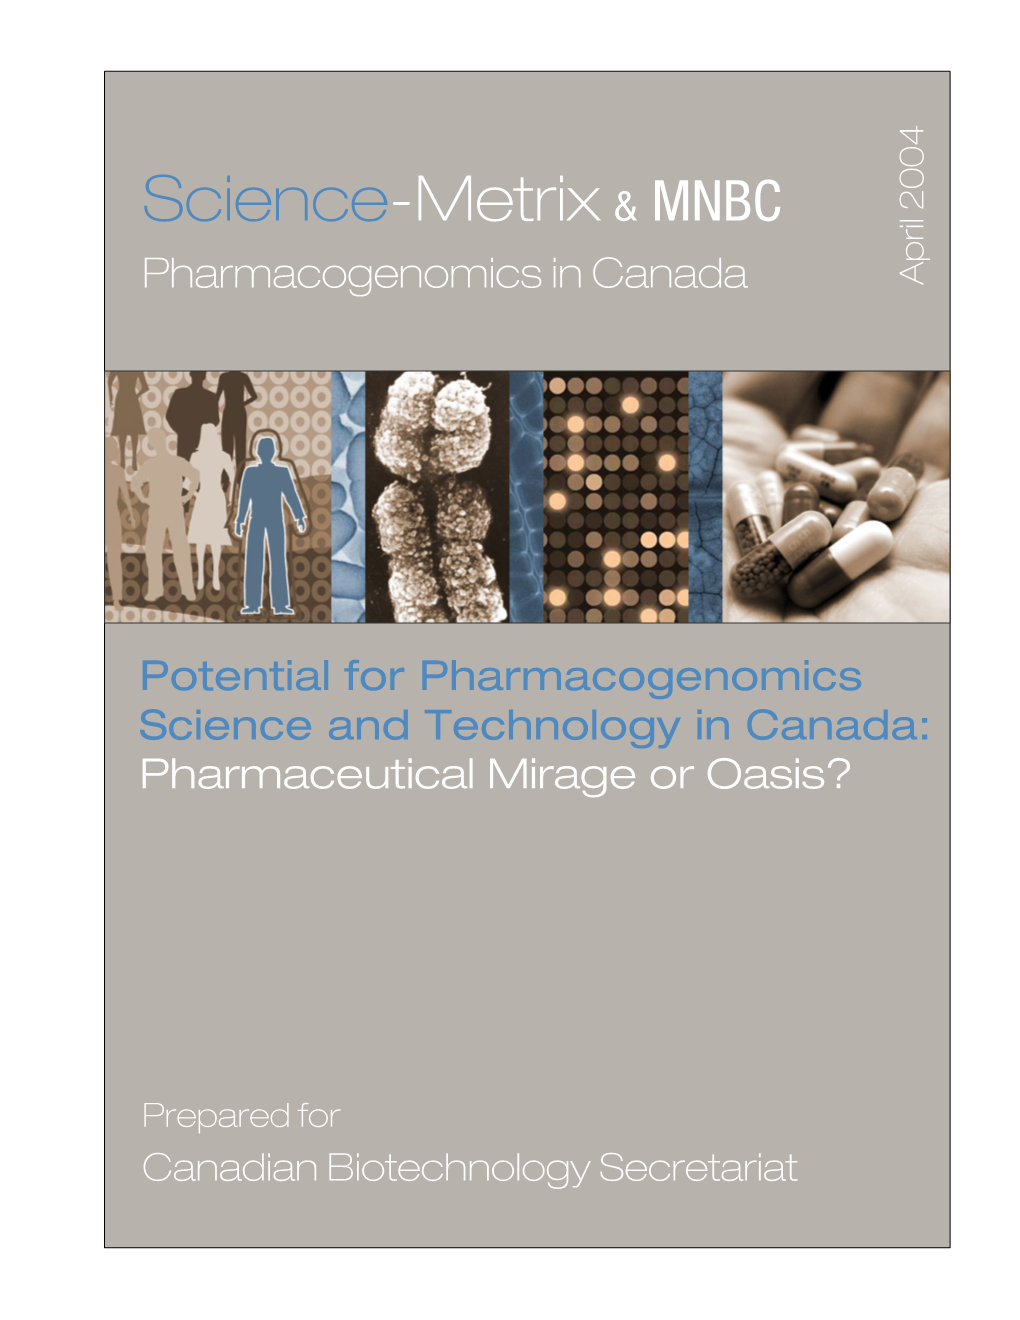 Potential for Pharmacogenomics Science and Technology in Canada: Pharmaceutical Mirage Or Oasis?